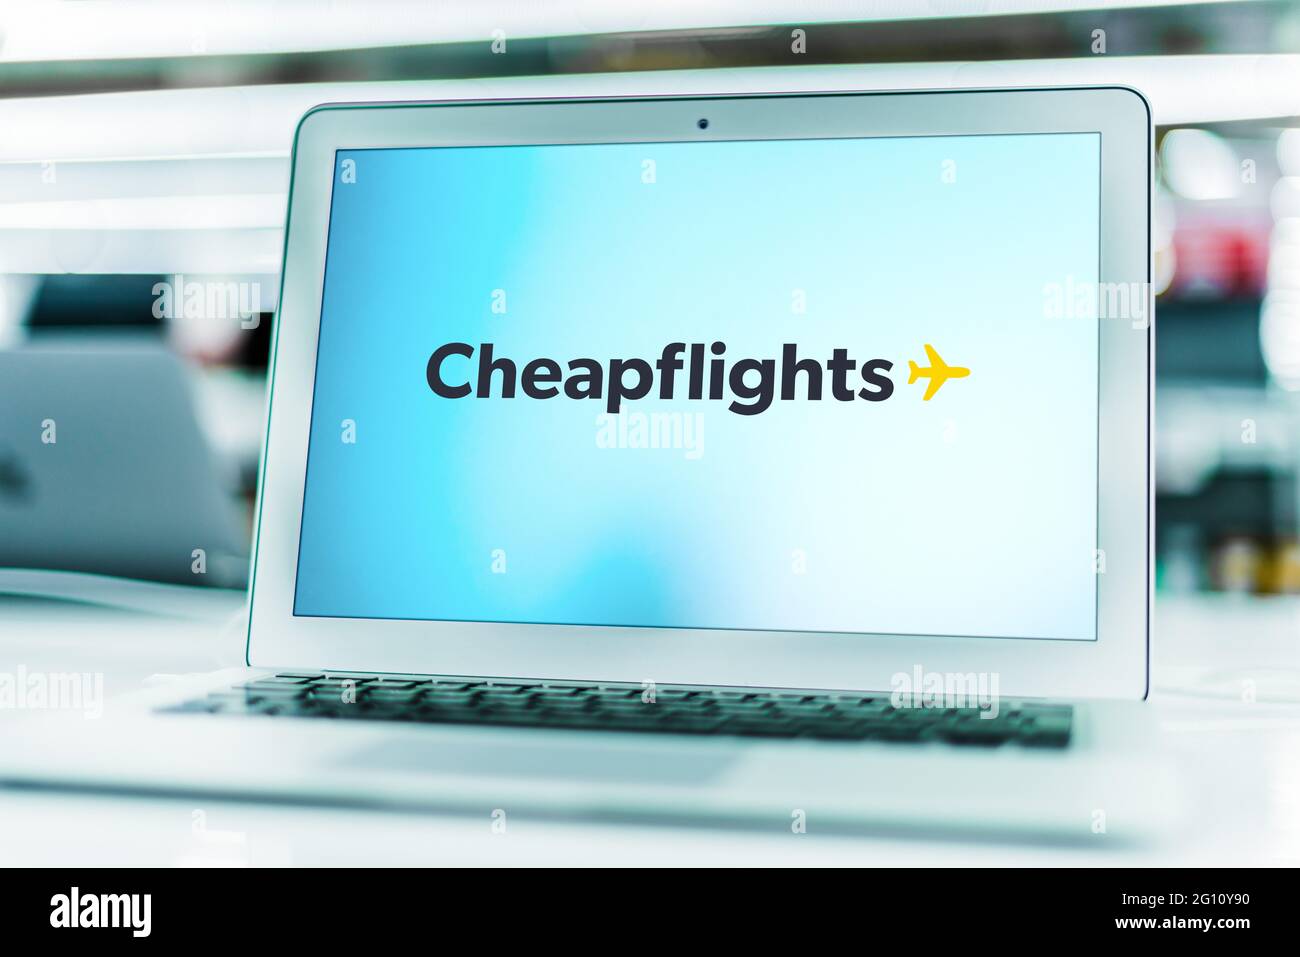 POZNAN, POL - MAY 1, 2021: Laptop computer displaying logo of Cheapflights, a travel fare metasearch engine, part of the Kayak.com subsidiary of Booki Stock Photo